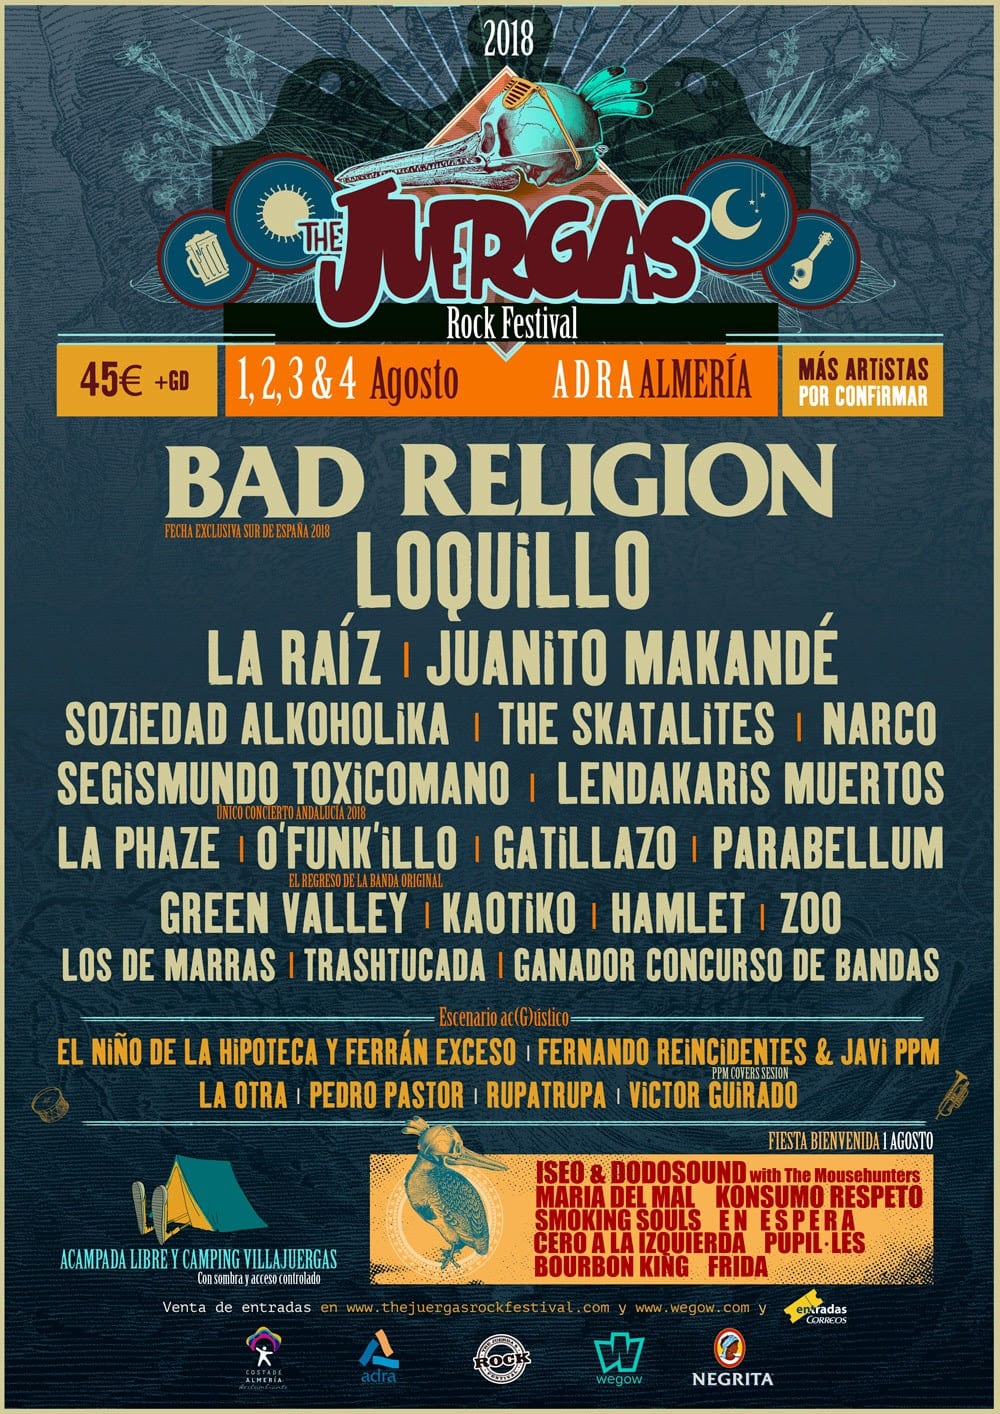 Bad Religion y Loquillo se suman a The Juergas Rock Festival 2018